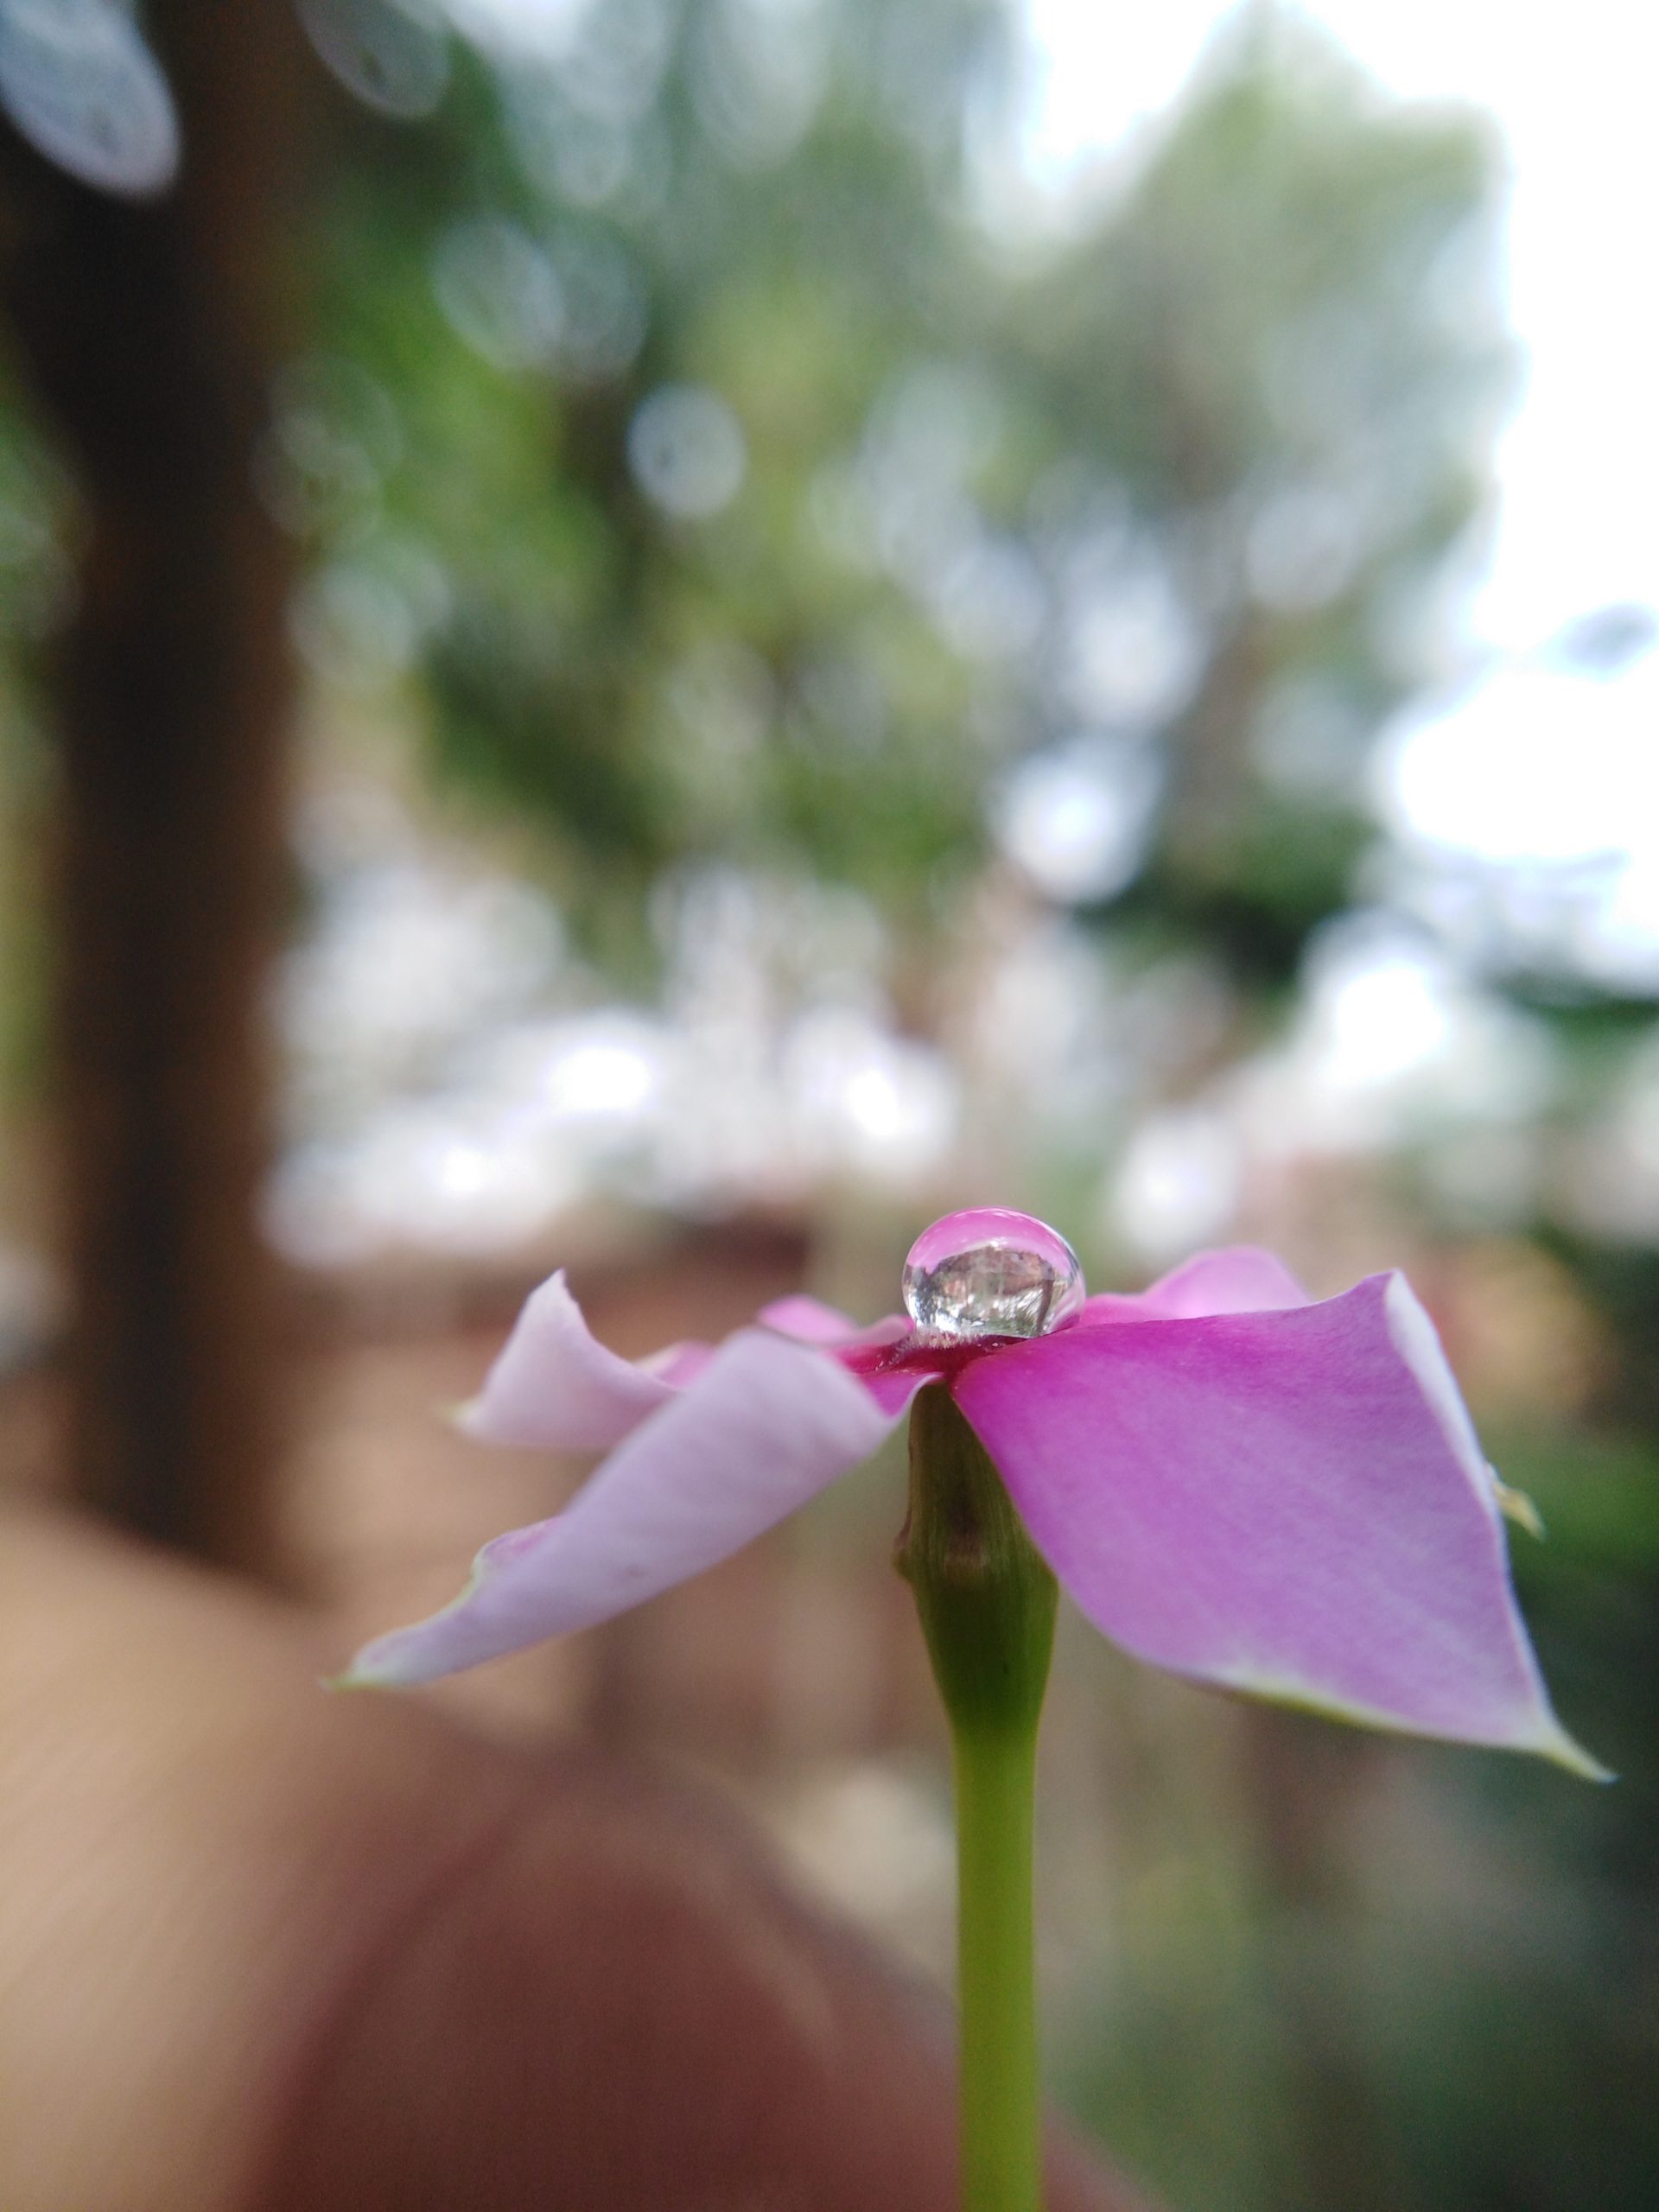 A water drop on a flower